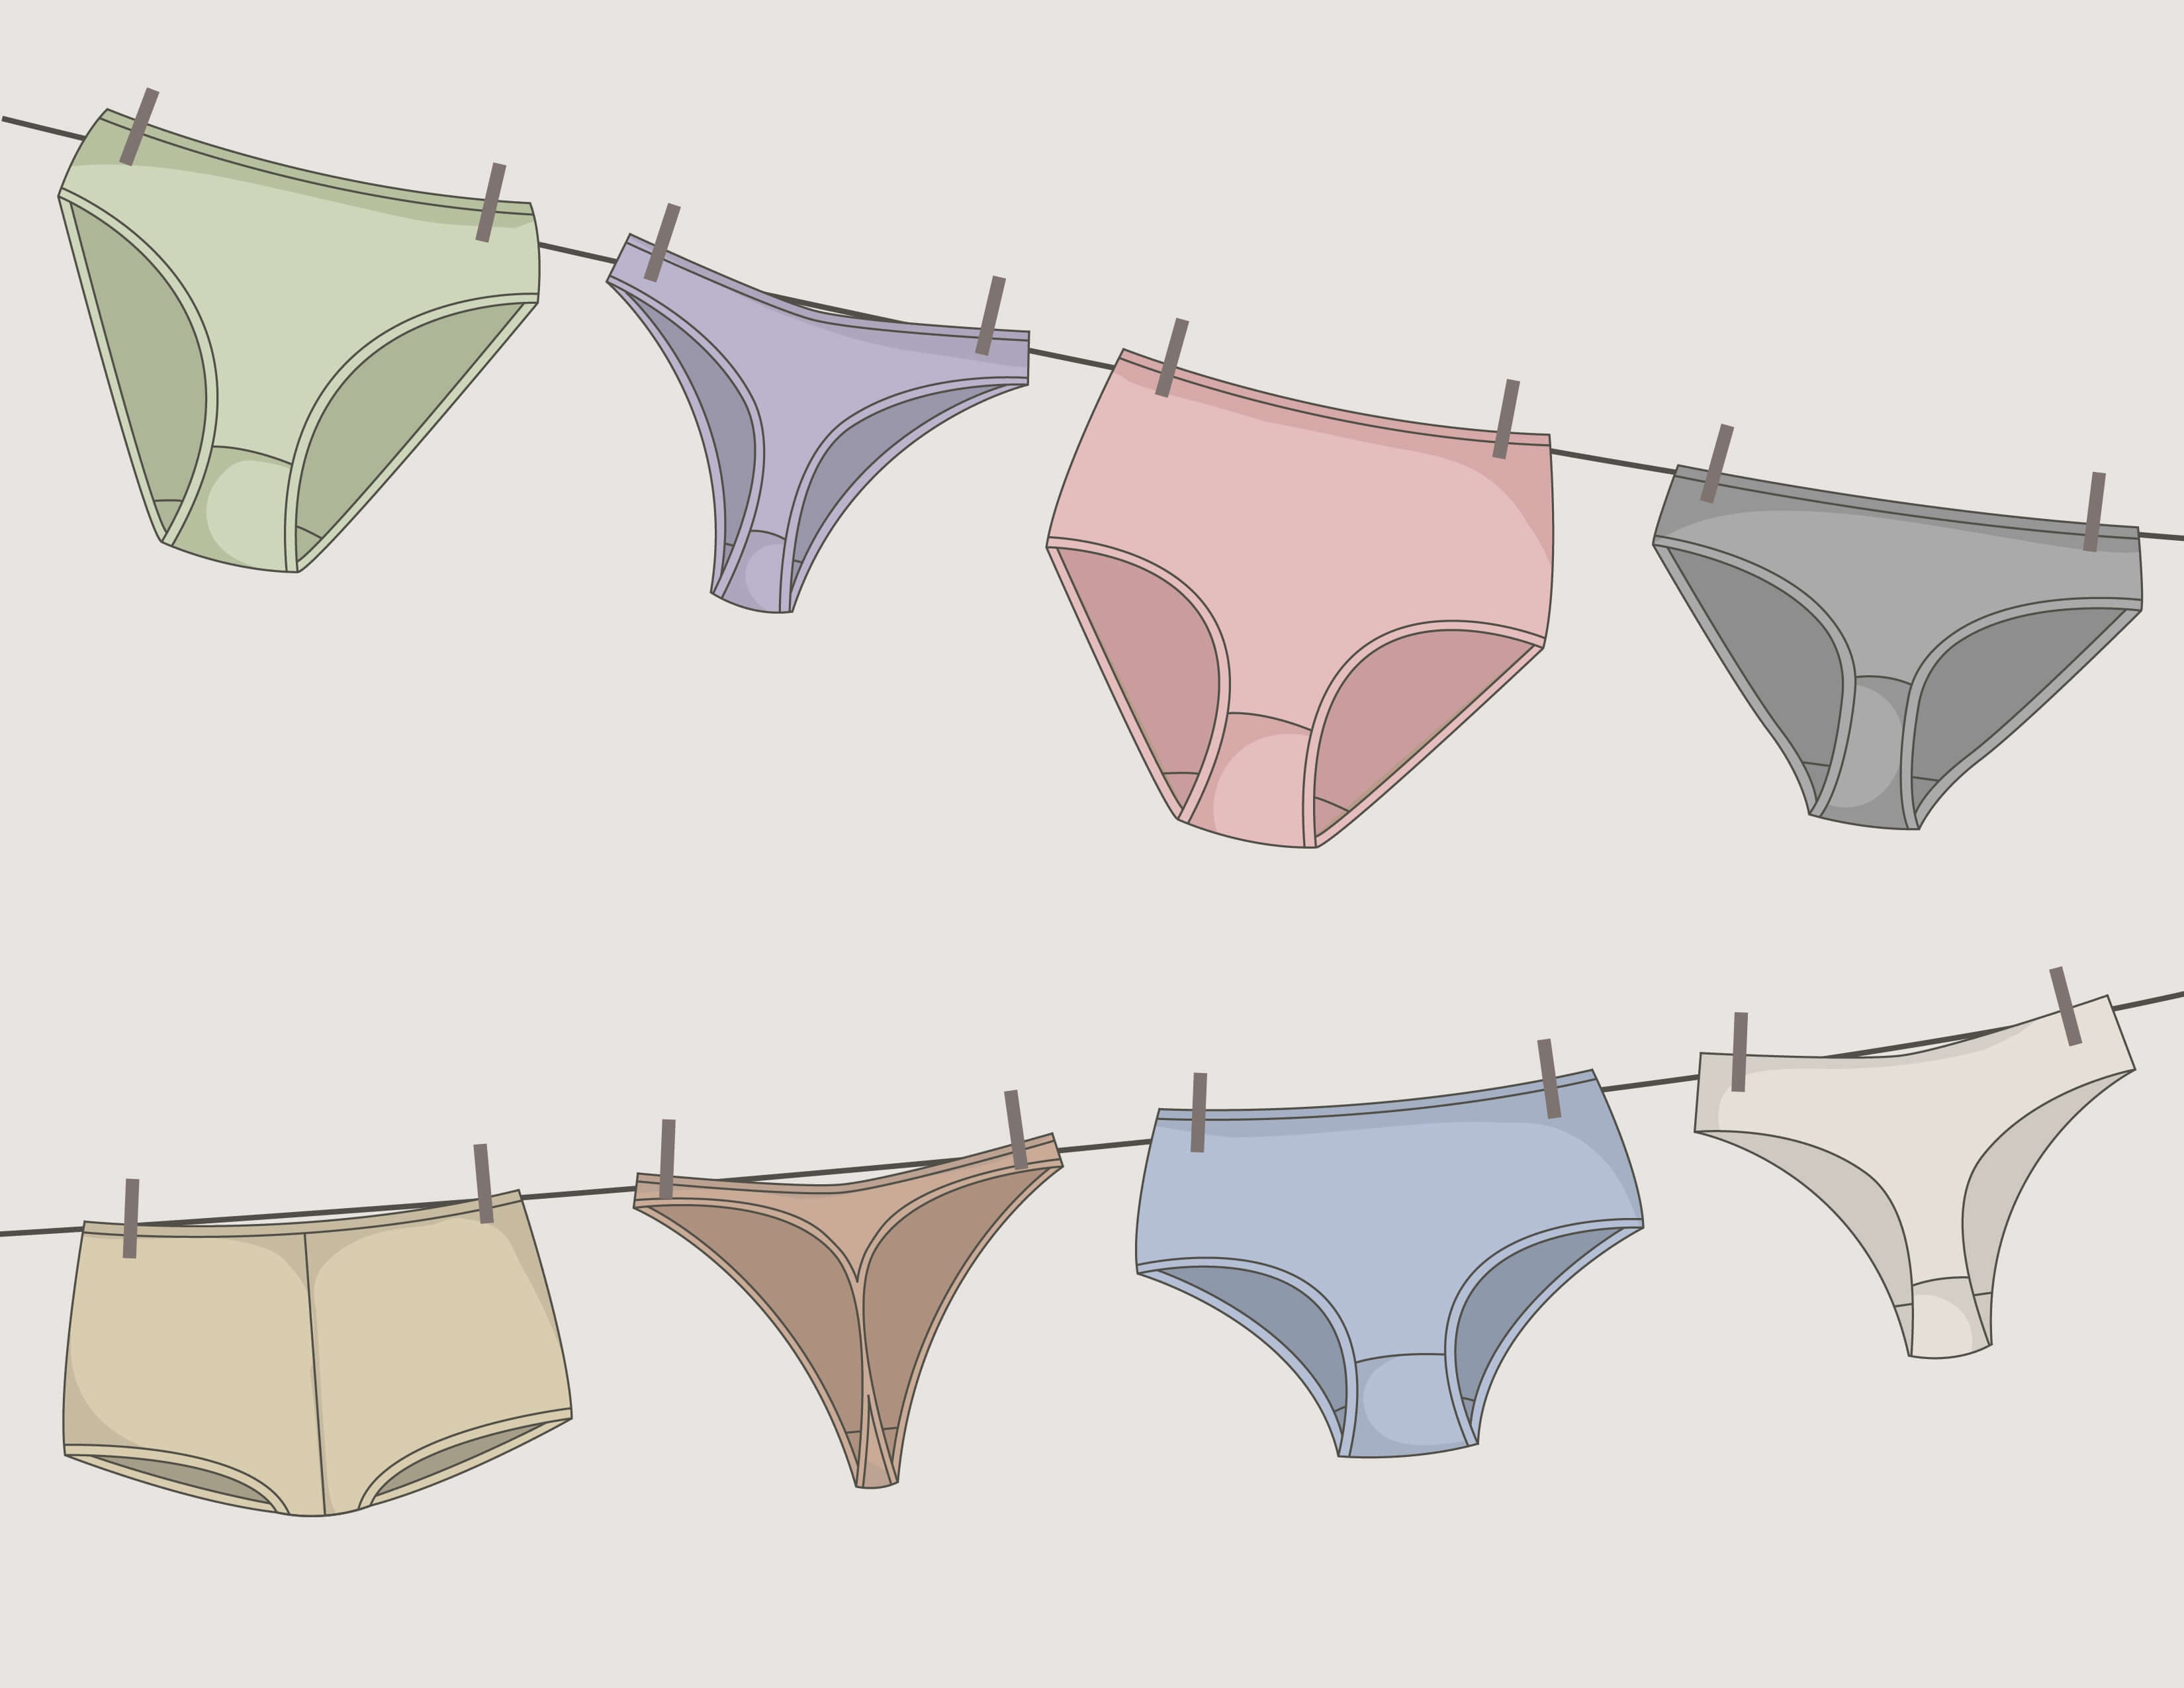 Four types of versatile teen underwear every girl must have